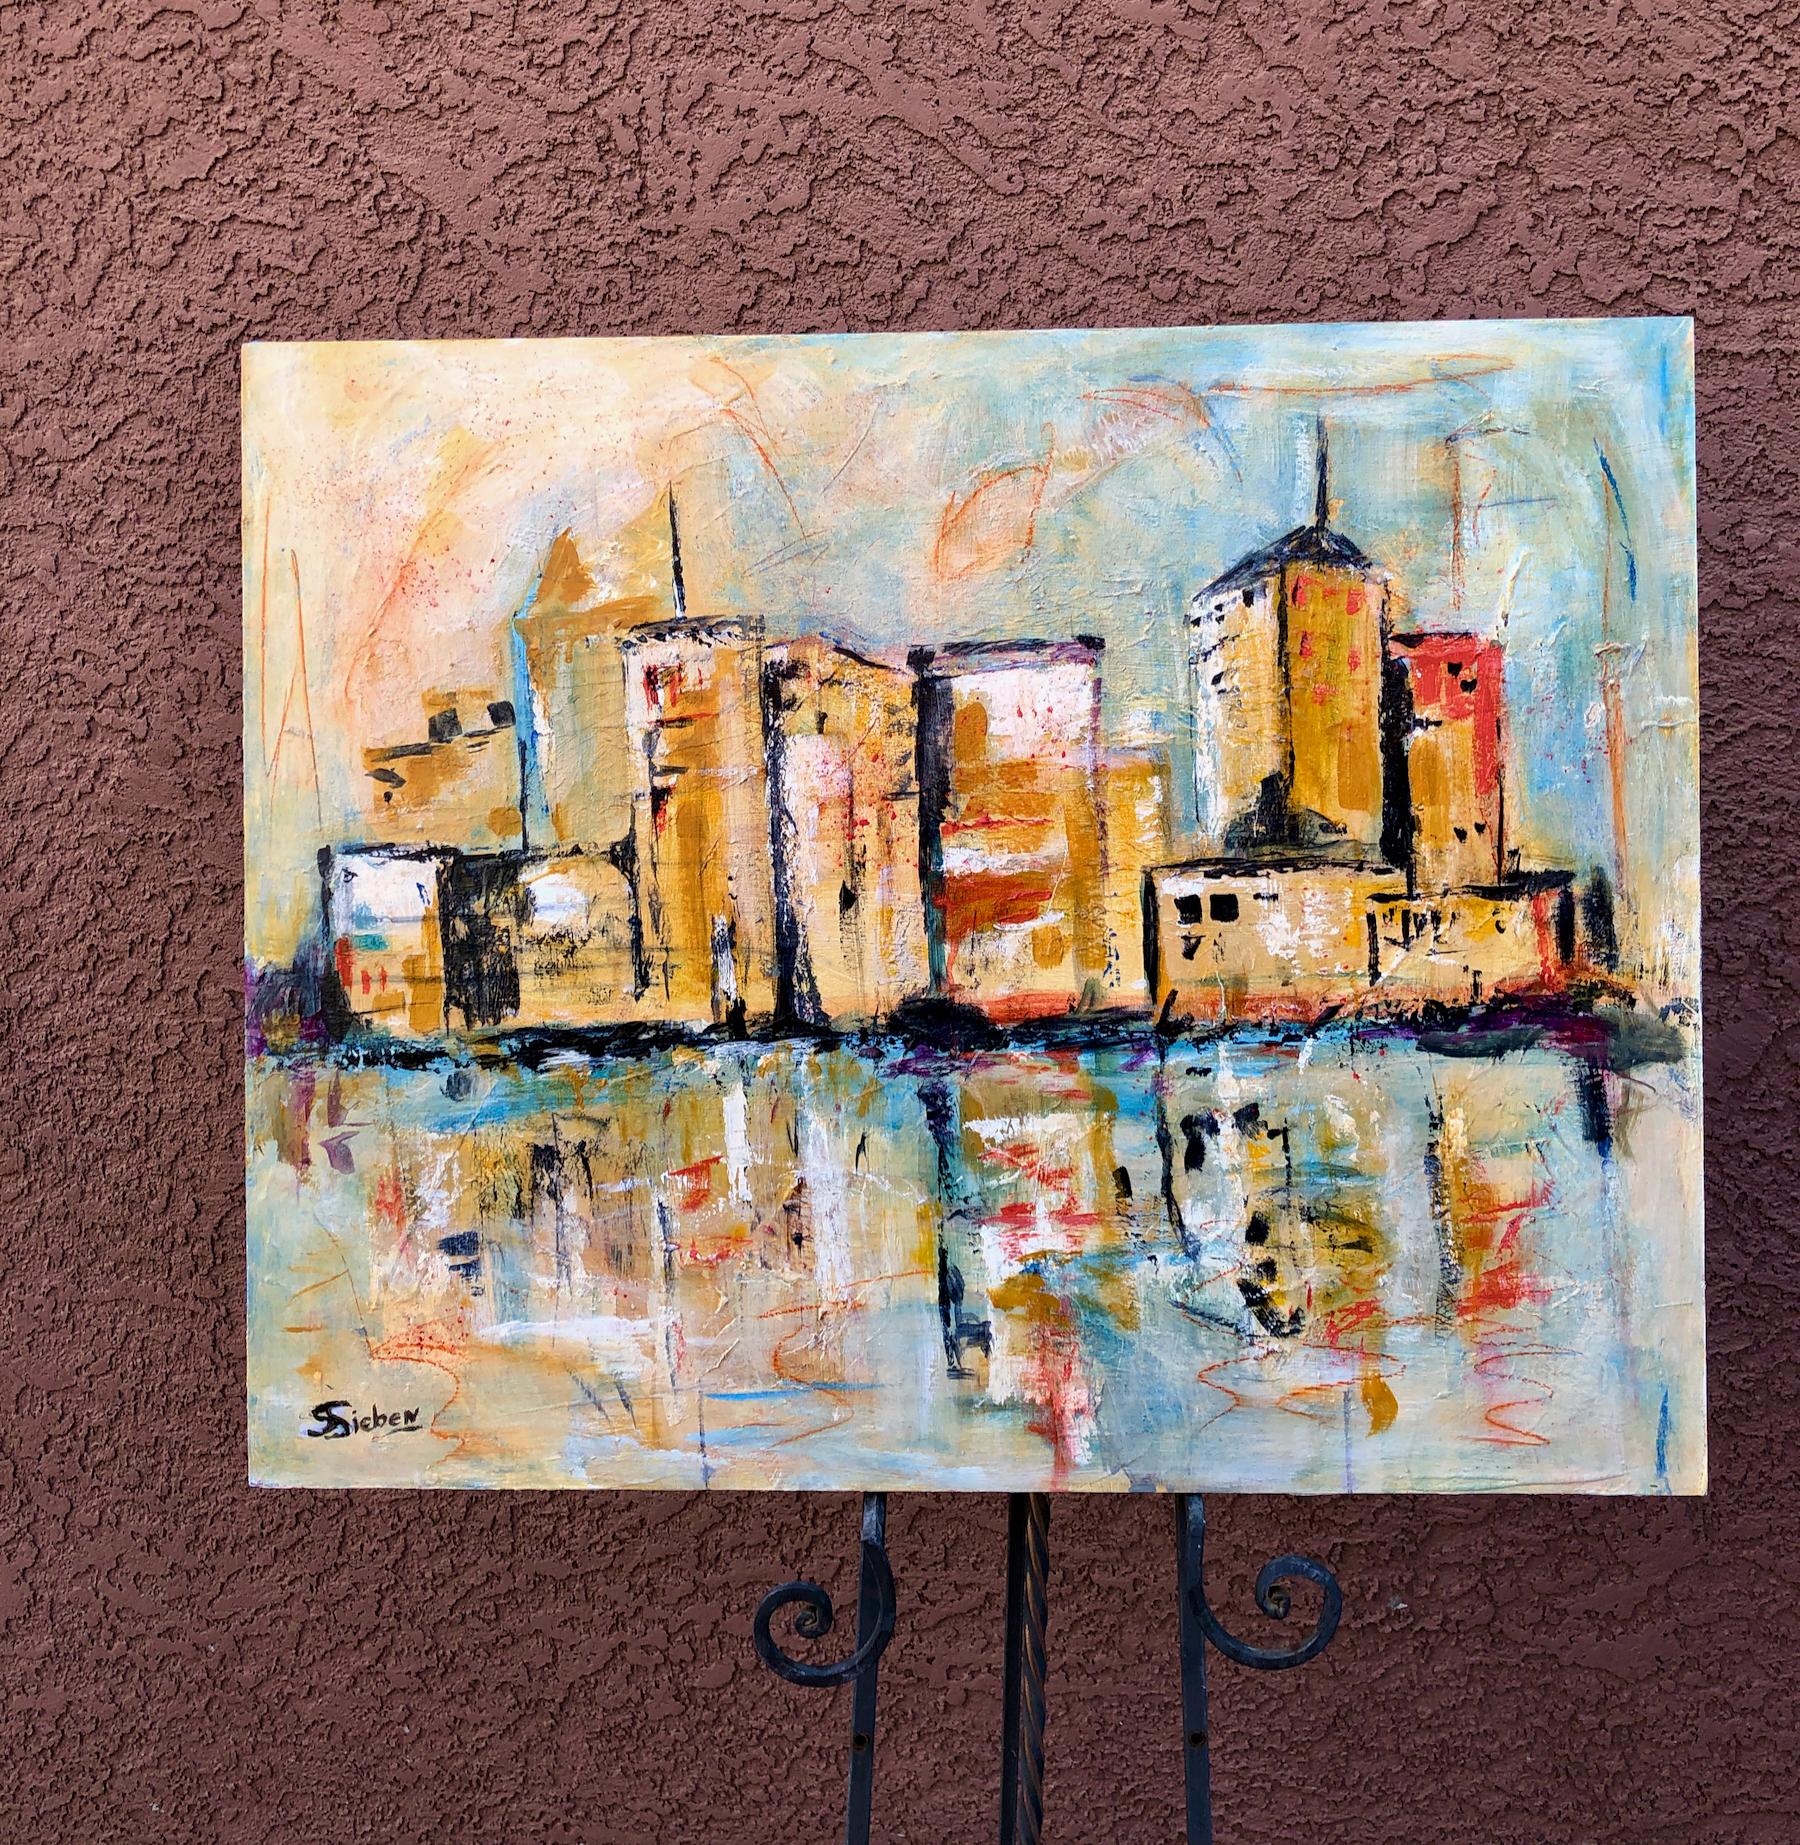 <p>Artist Comments<br>Sharon Sieben pictures an abstracted glimpse of a stunning skyline. Buildings reach out into the sky and reflect on the gleaming riverfront. She adds energetic marks with wavy lines of red and blue. In bold strokes, she aptly